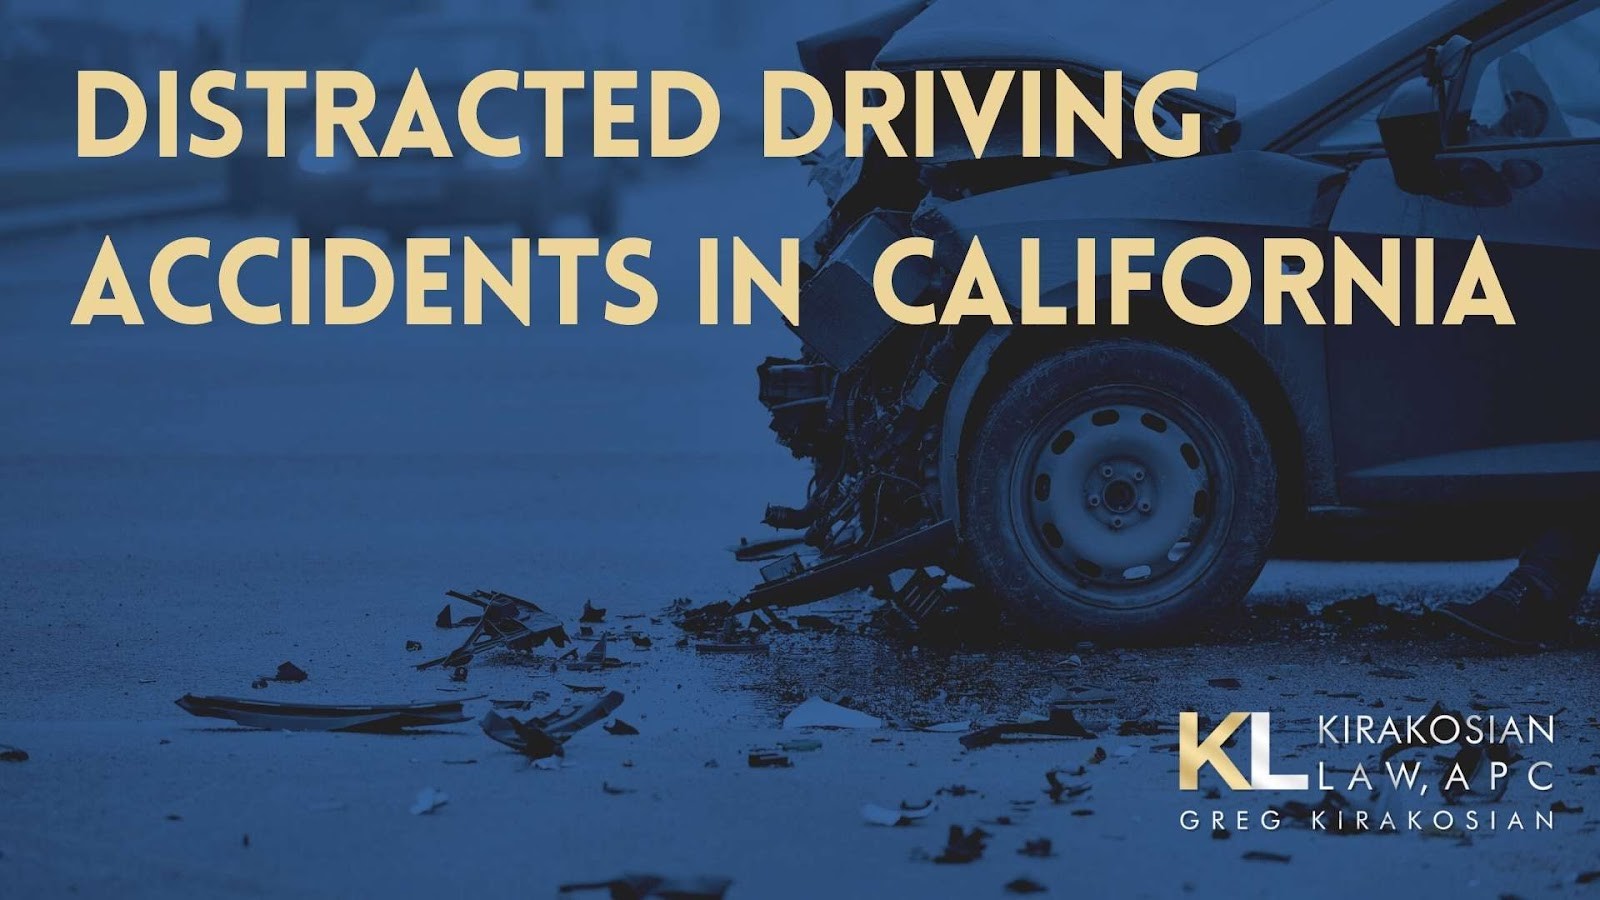 Distracted Driving Accidents in California